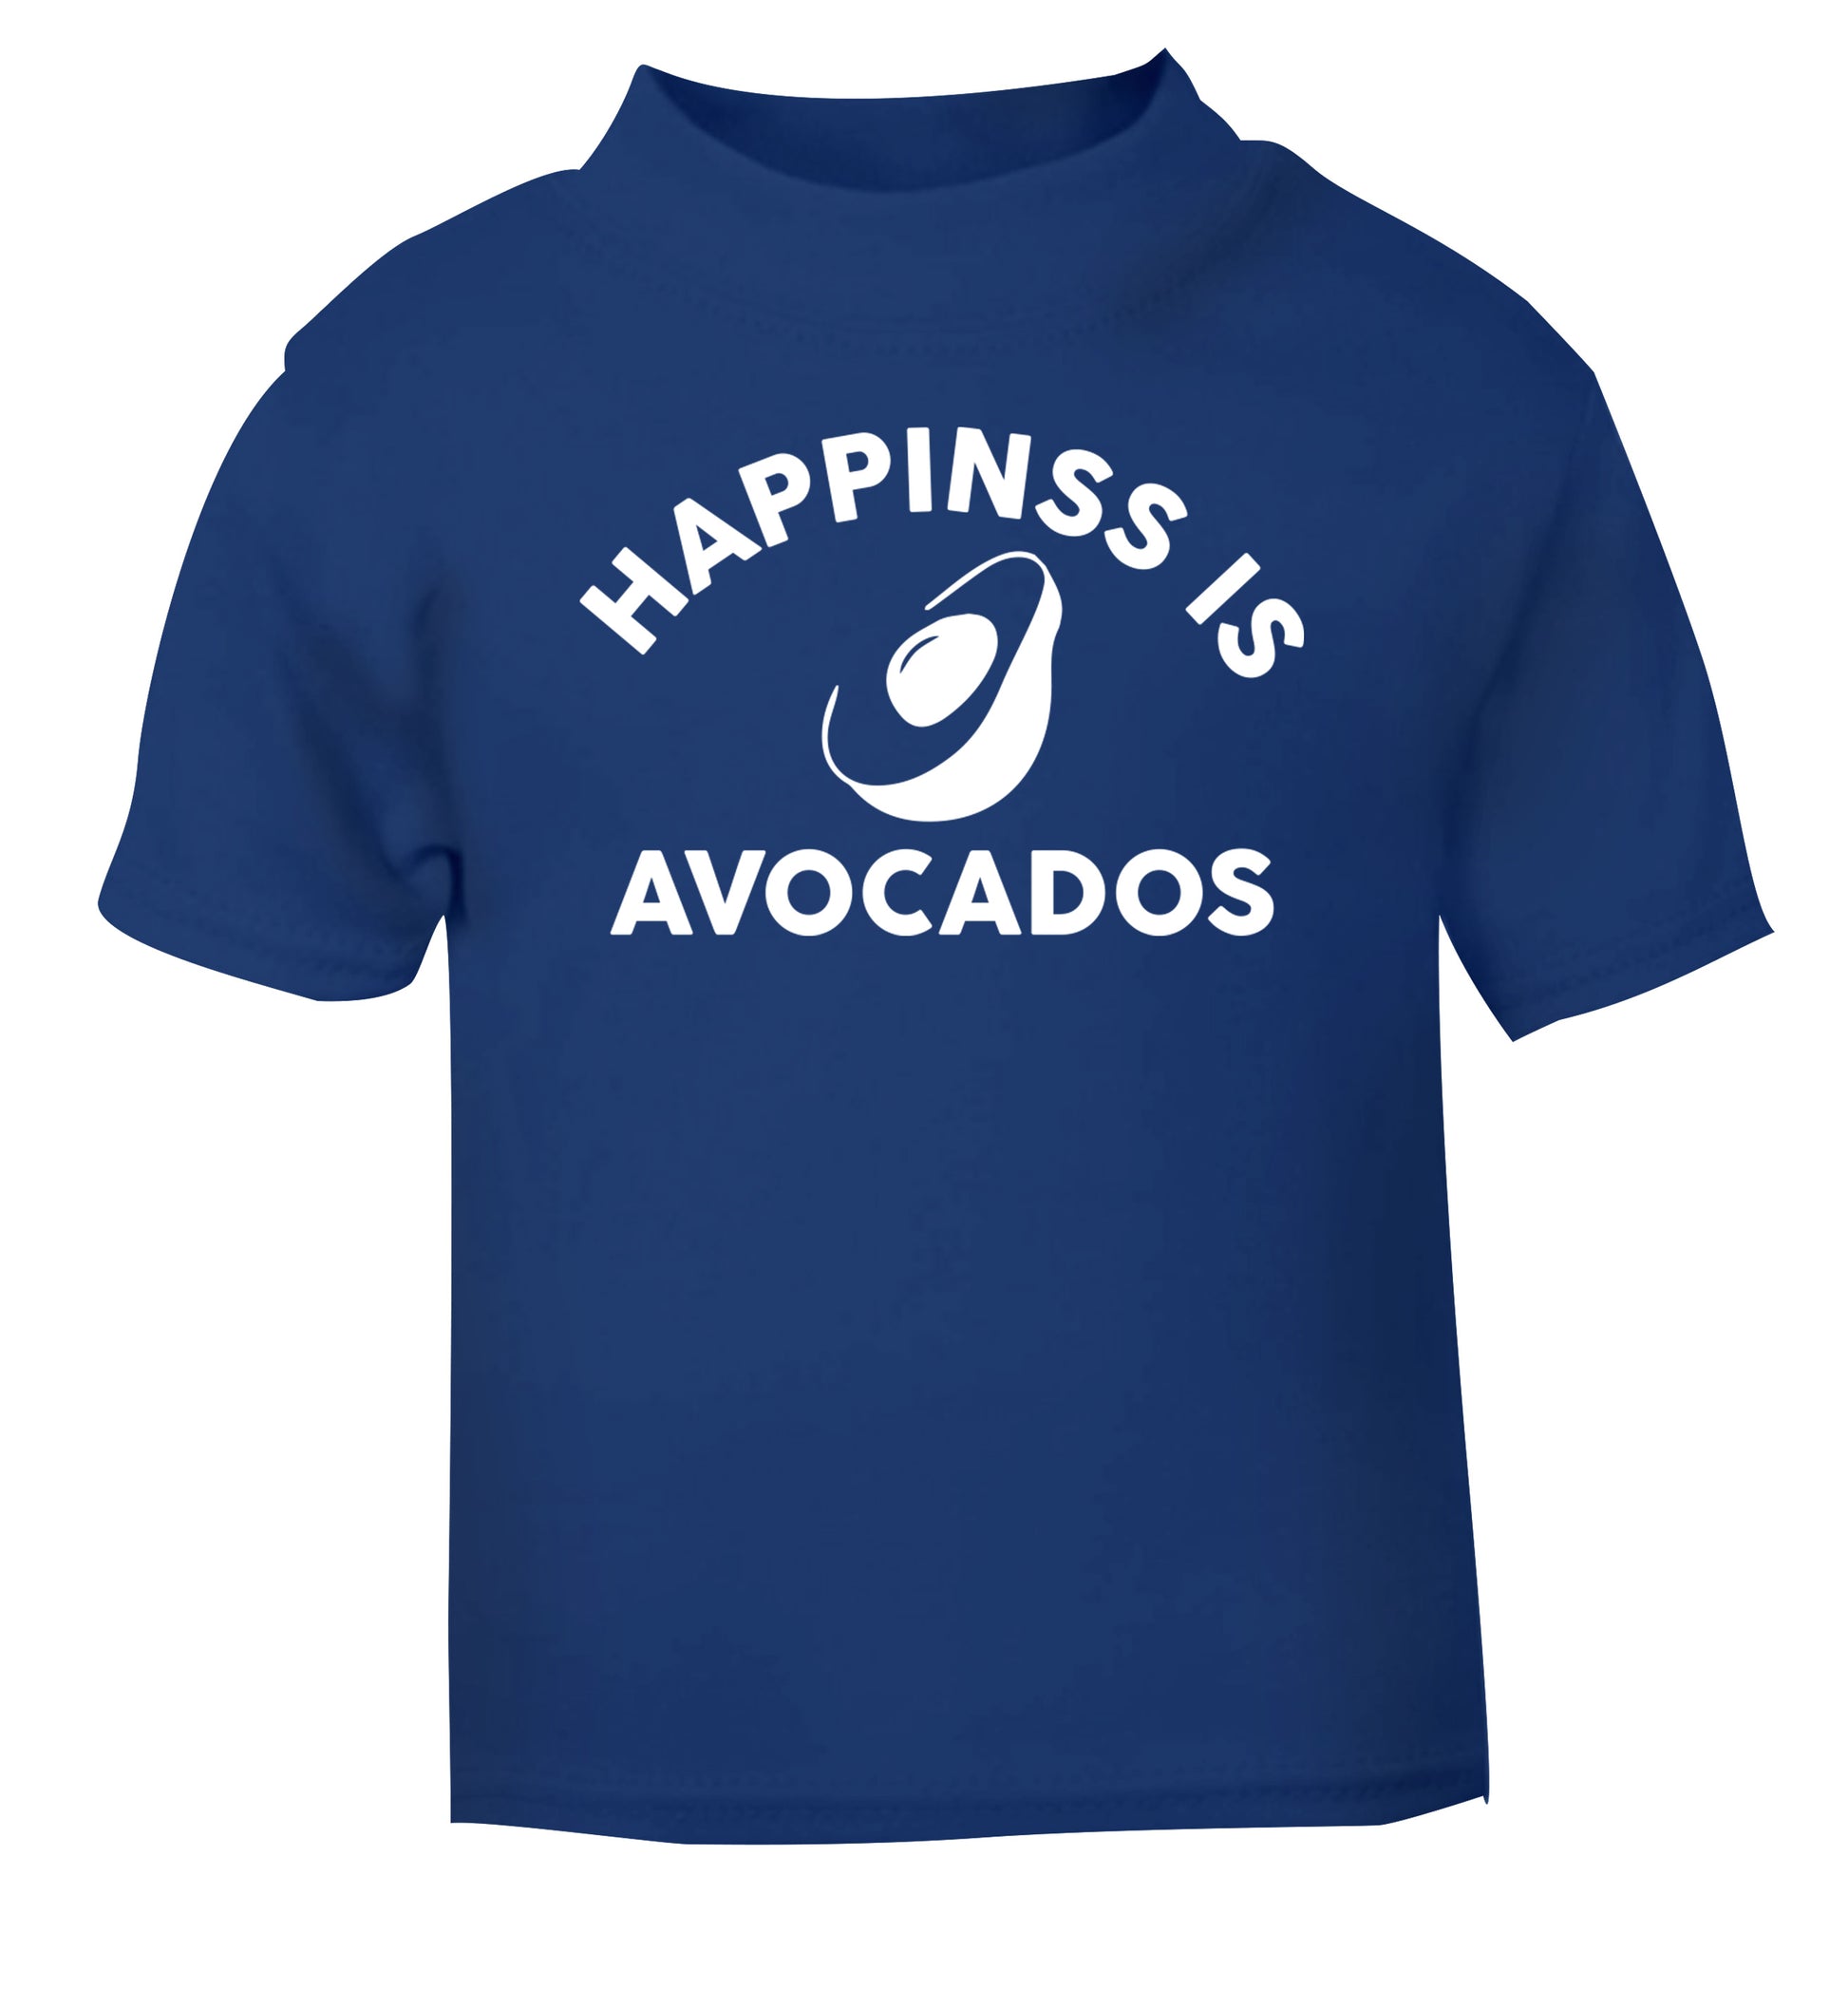 Happiness is avocados blue Baby Toddler Tshirt 2 Years